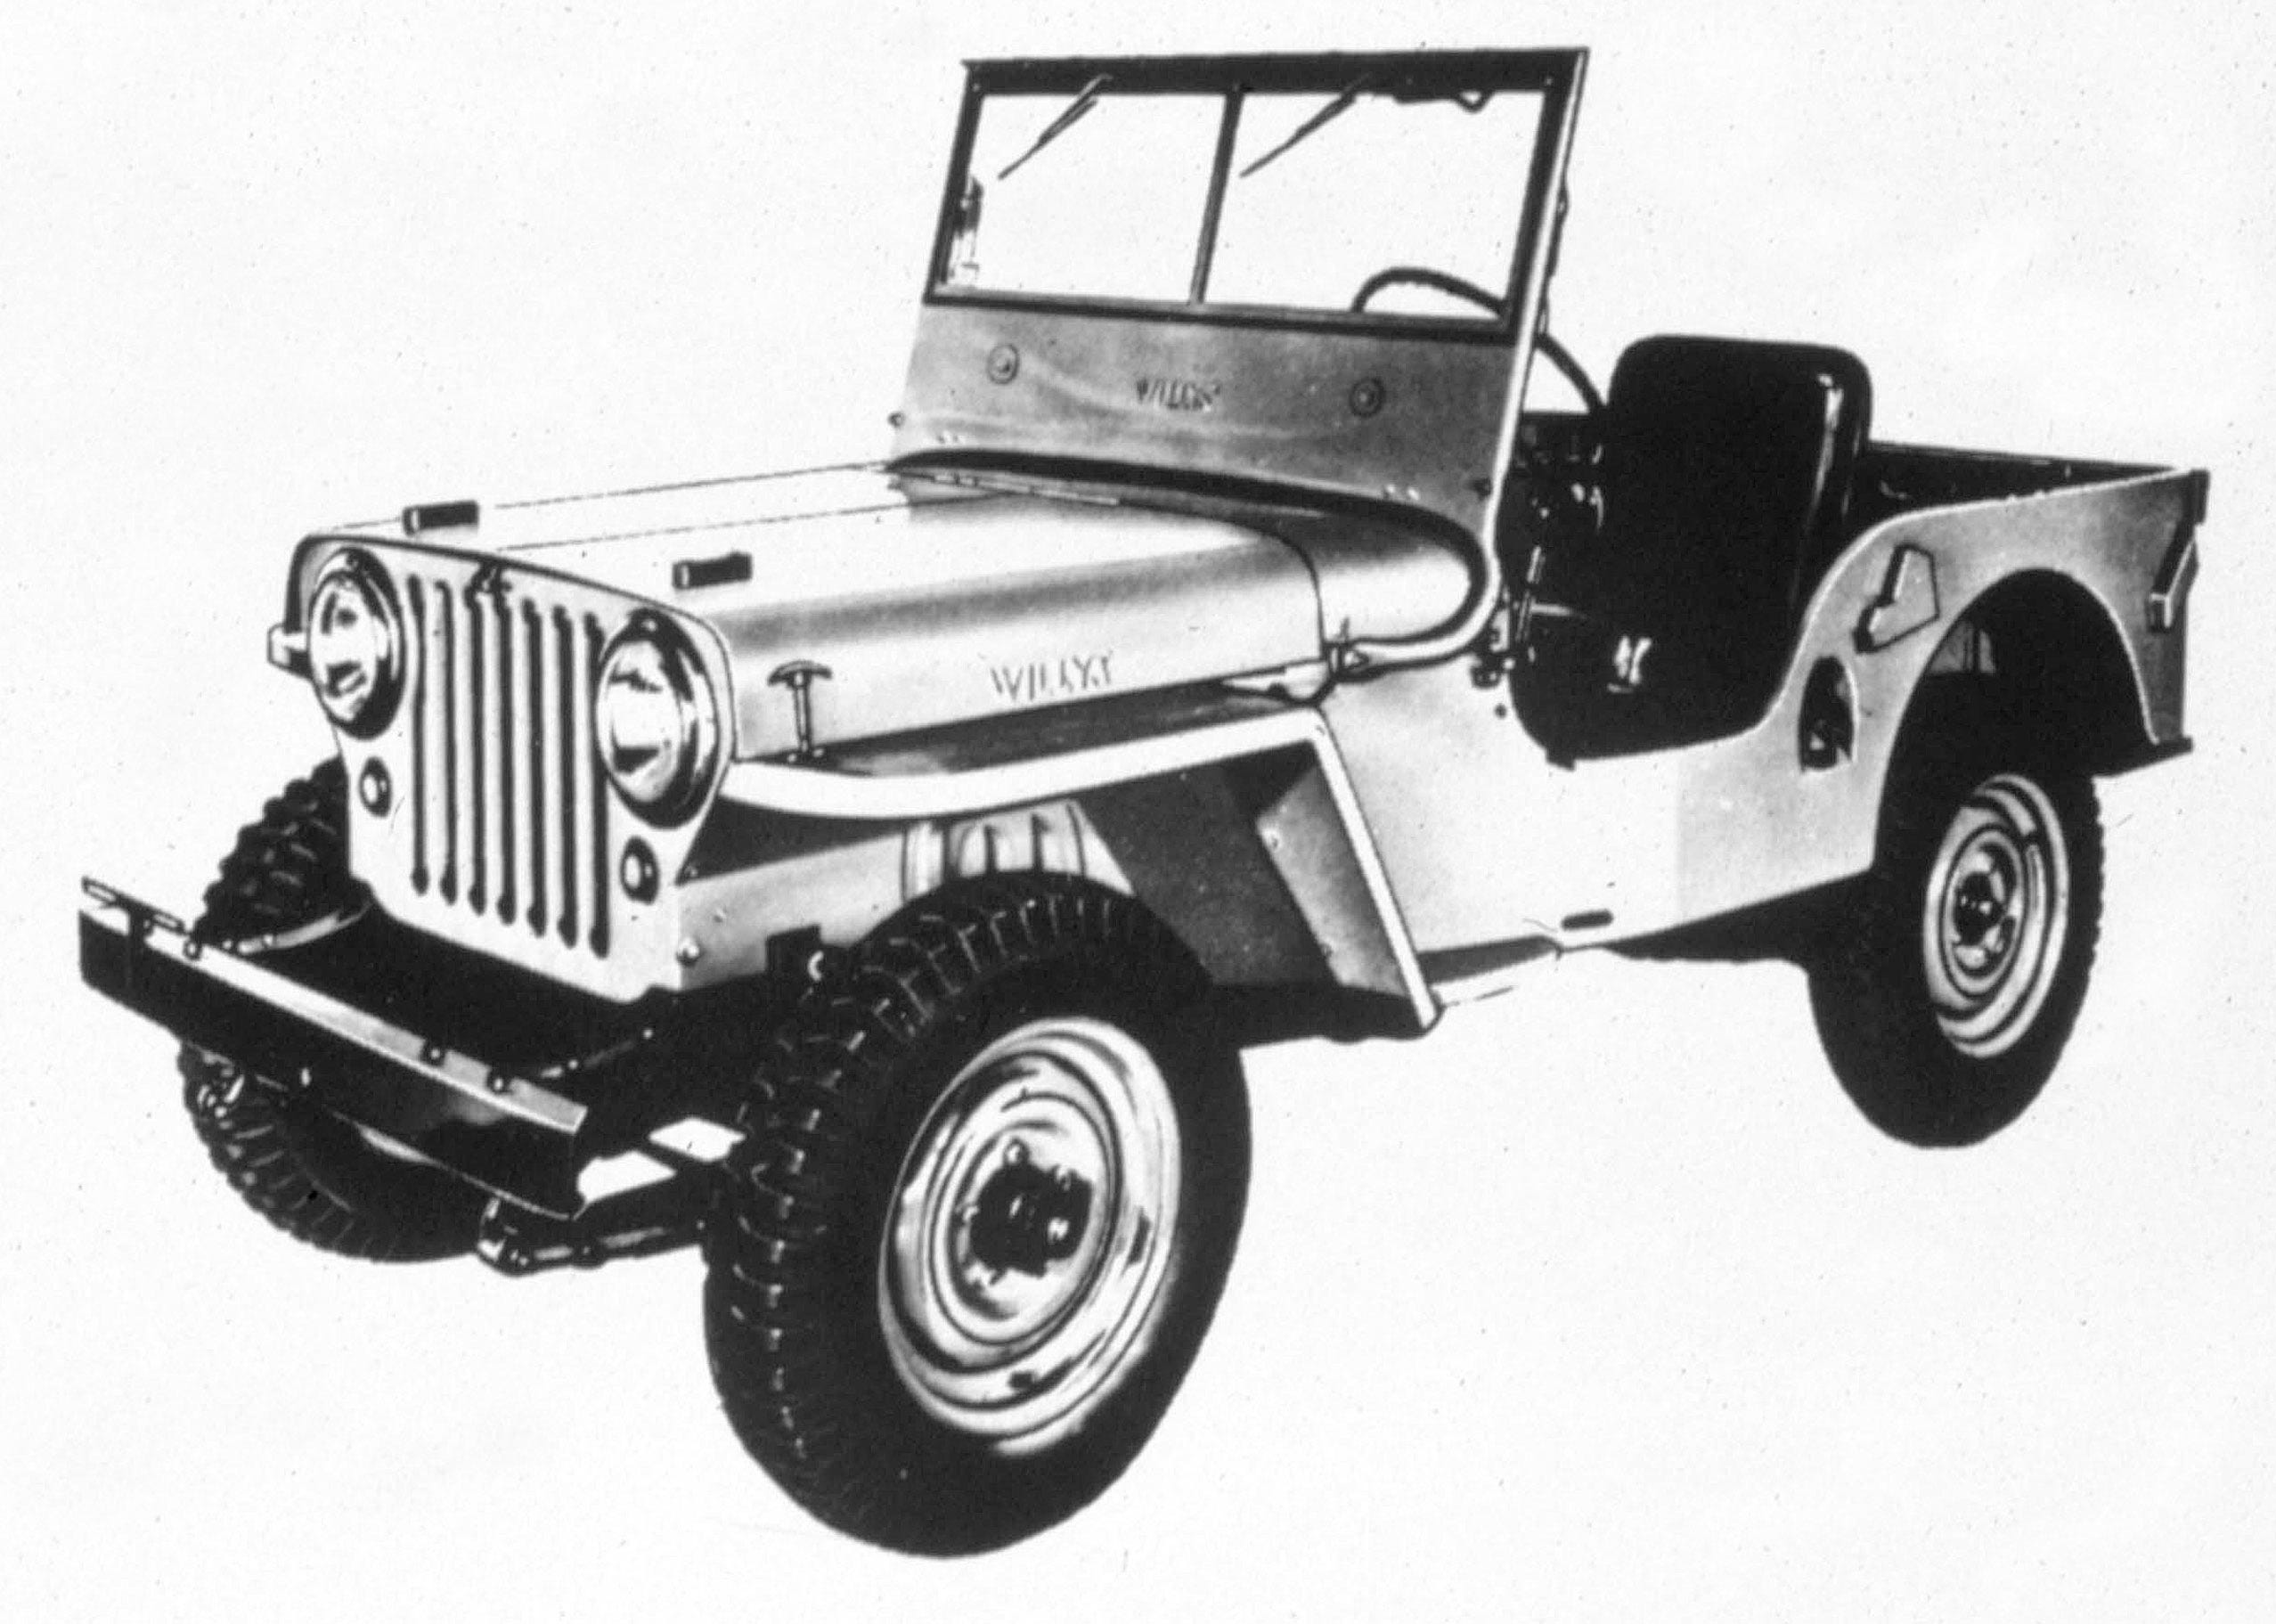 1945-1949 Jeep CJ-2A: The first civilian Jeep vehicle, the CJ-2A, was produced in 1945. It came with a tailgate, side-mounted spare tire, larger headlights, an external fuel cap and many more items that its military predecessors did not include.  The CJ-2A was produced for four years.